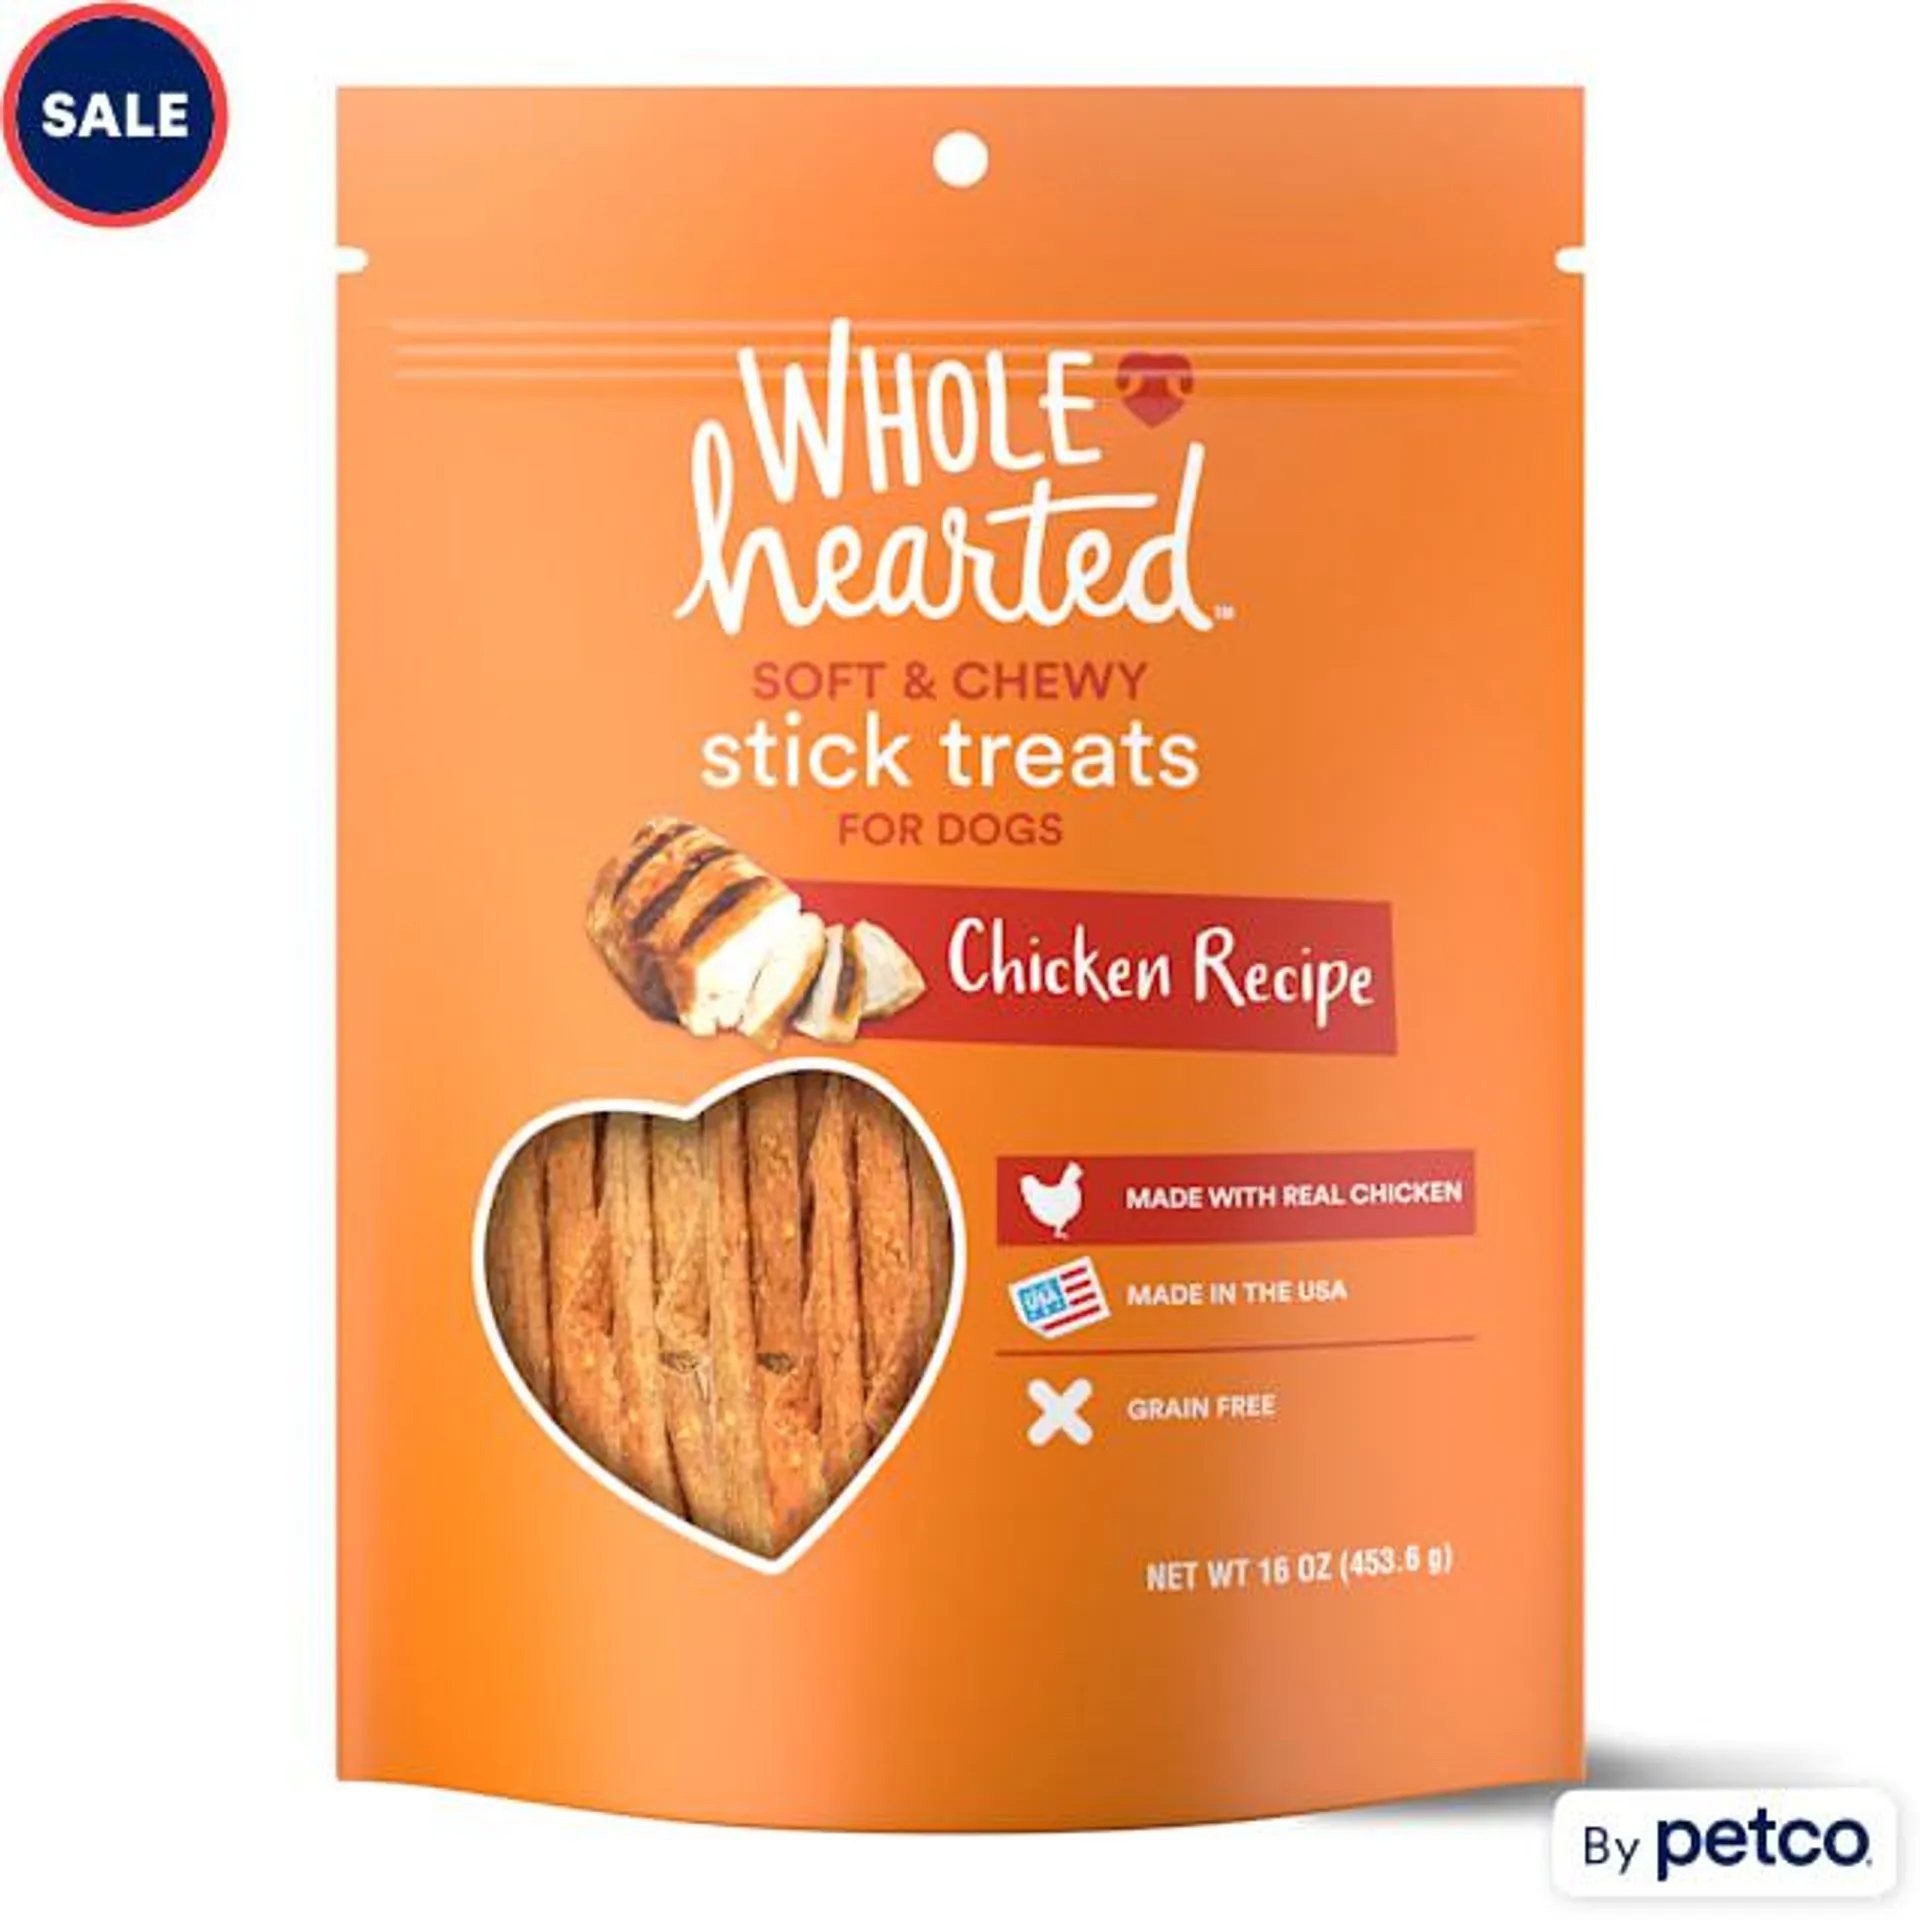 WholeHearted Grain Free Soft and Chewy Chicken Recipe Dog Stick Treats, 16 oz